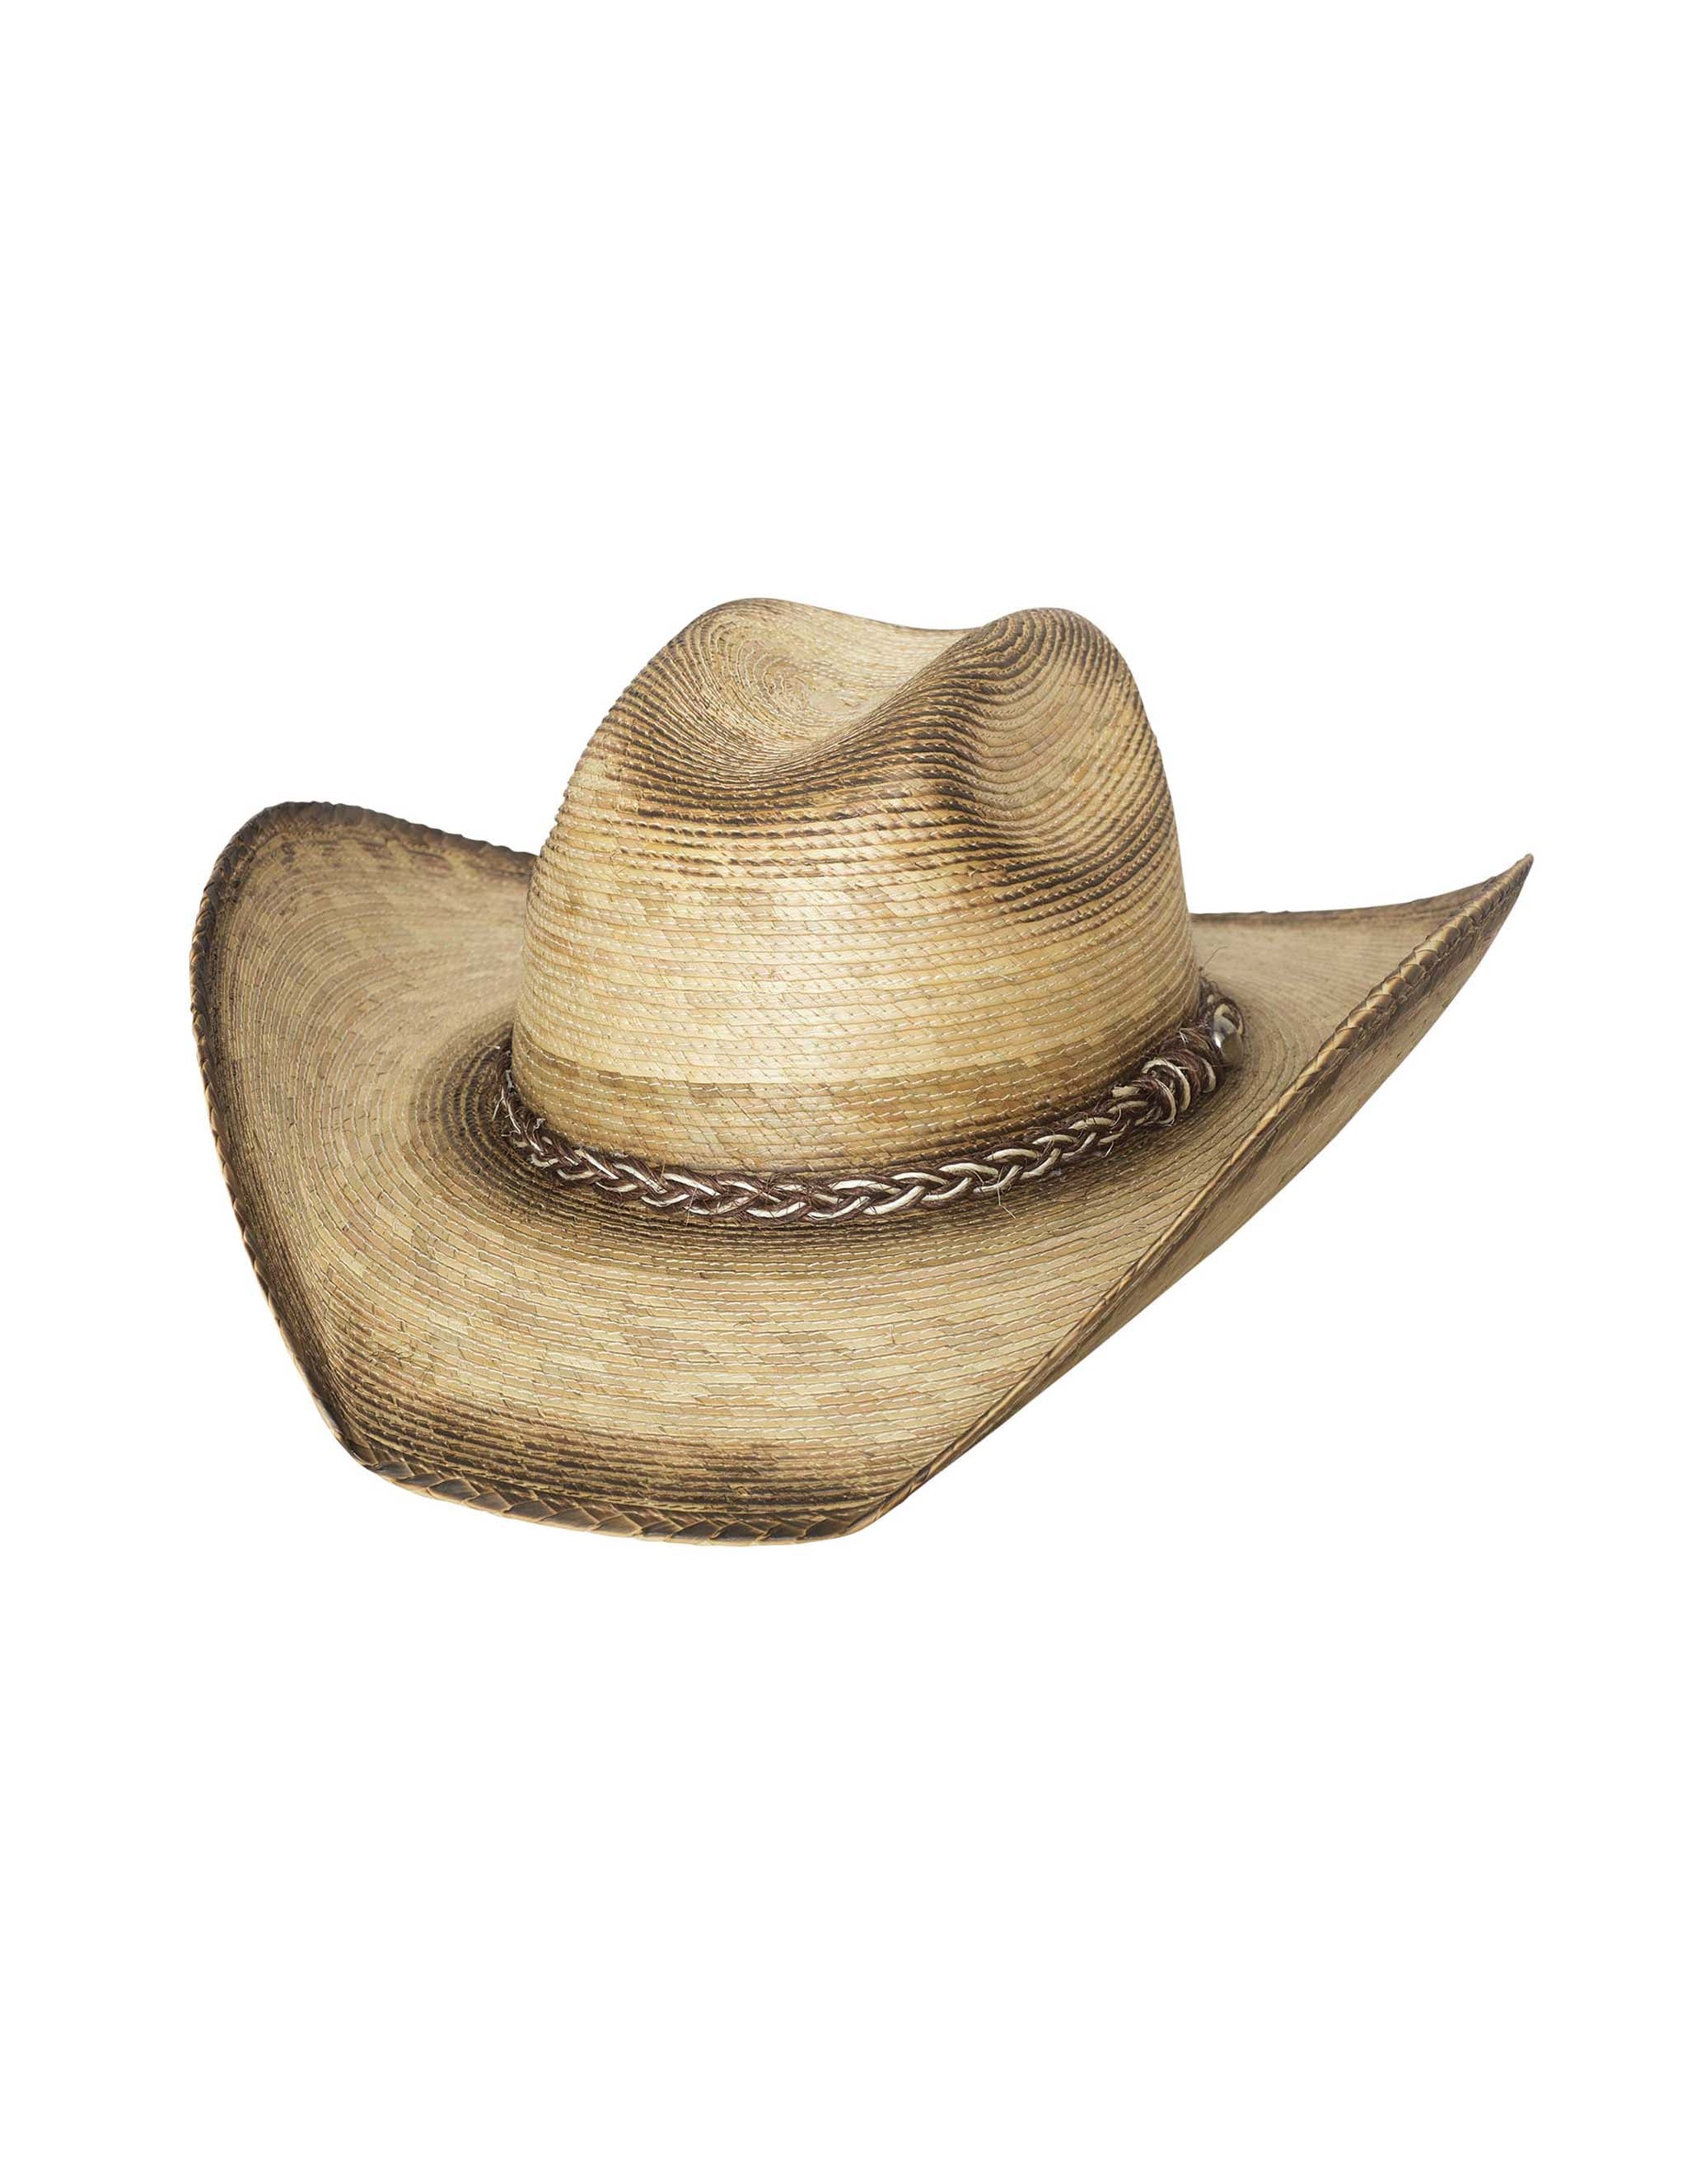 Outrider Youth Cowboy Hat